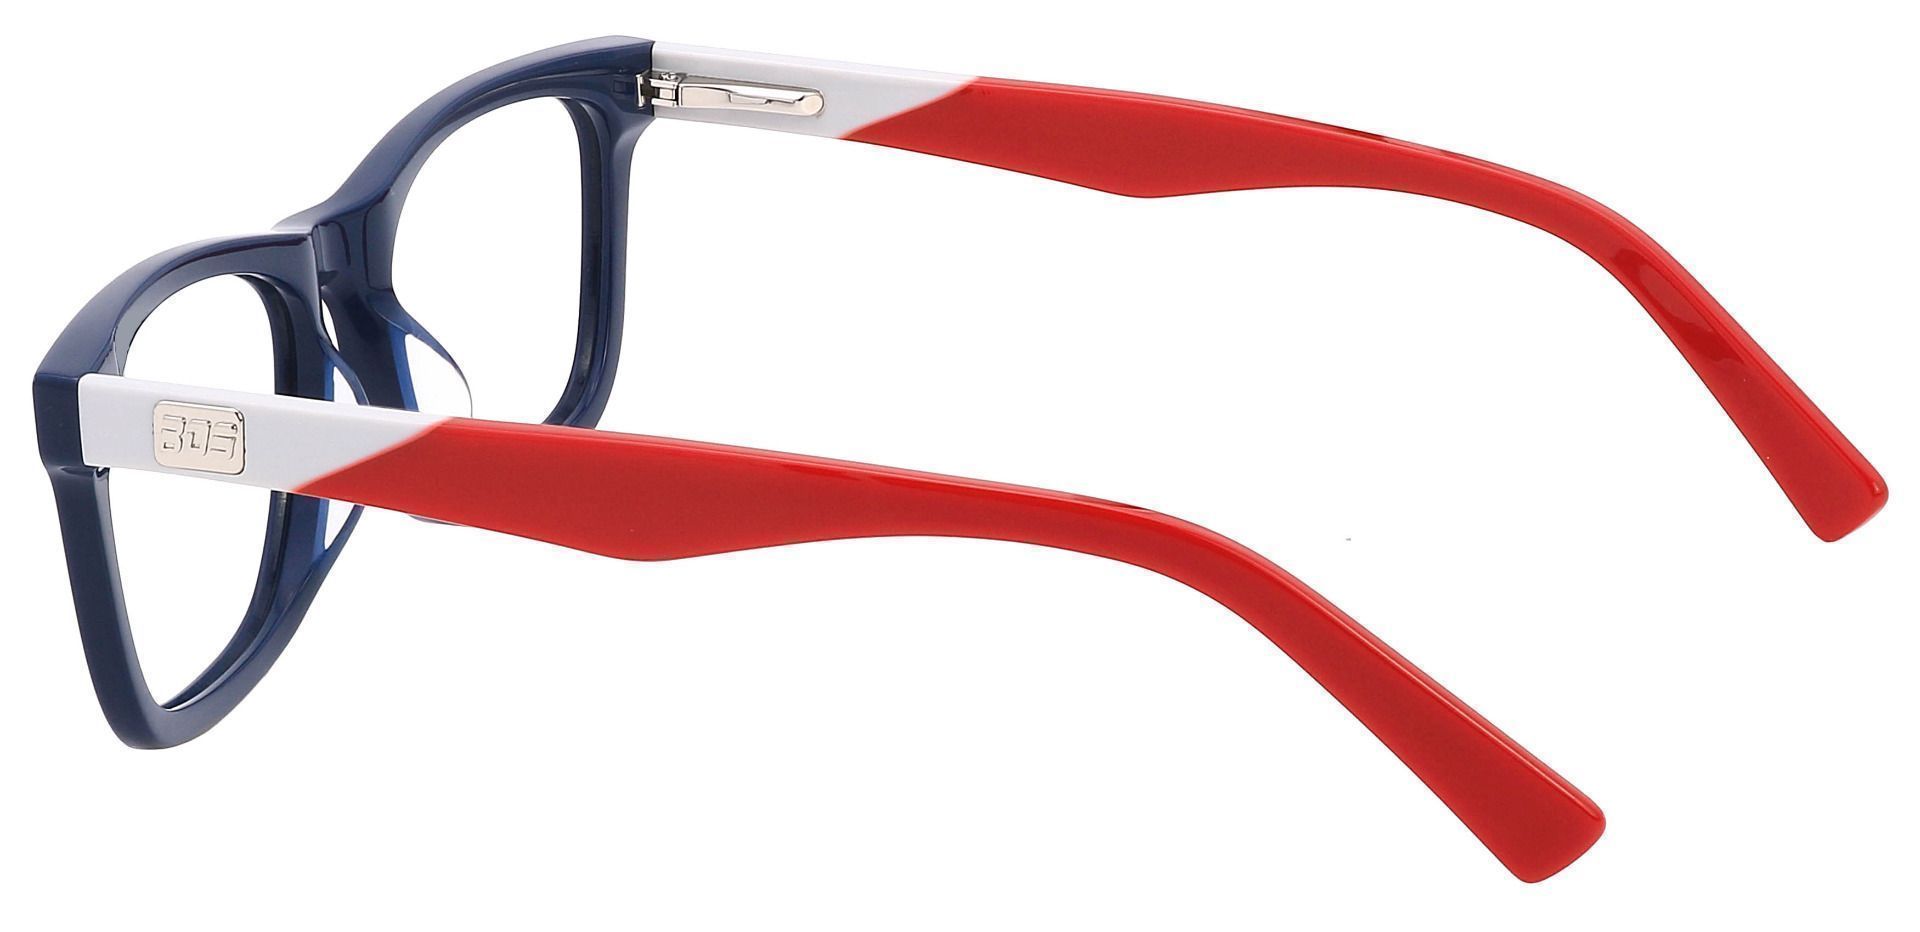 Newbury Rectangle Prescription Glasses - The Frame Is Blue And Red